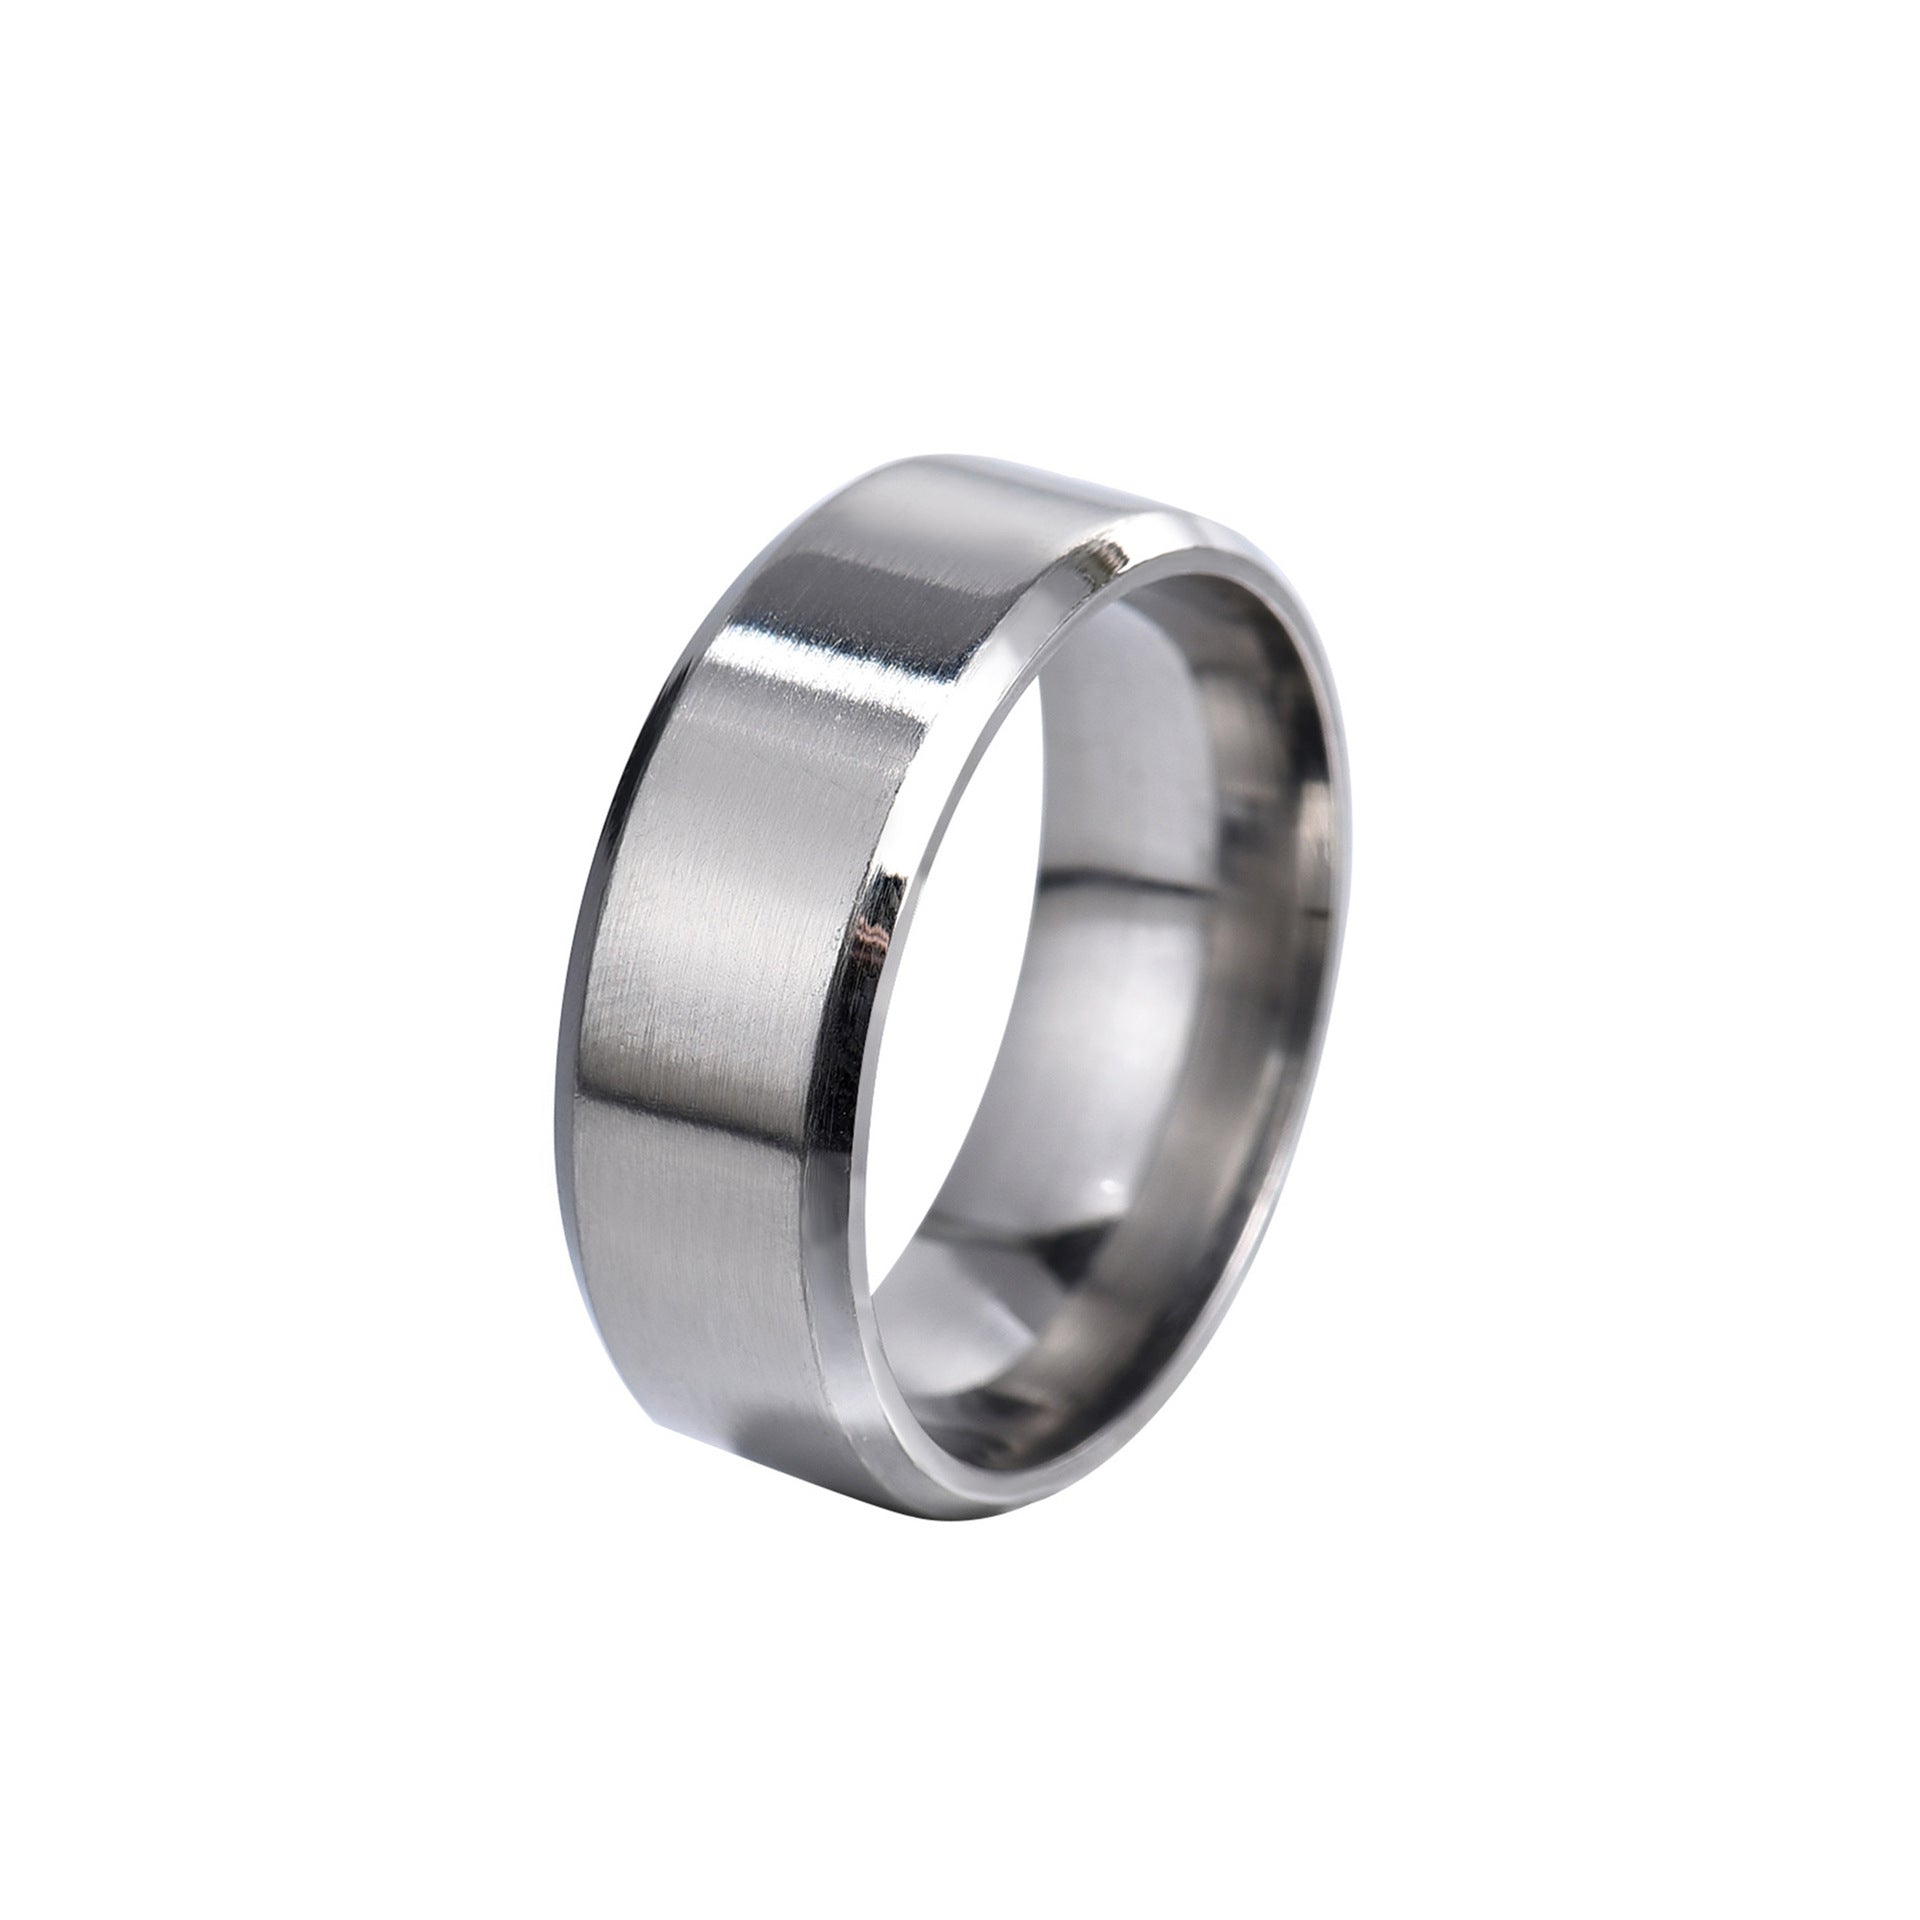 Silver Colored 316L Quality Steel Ring Wedding Ring (23 Size)